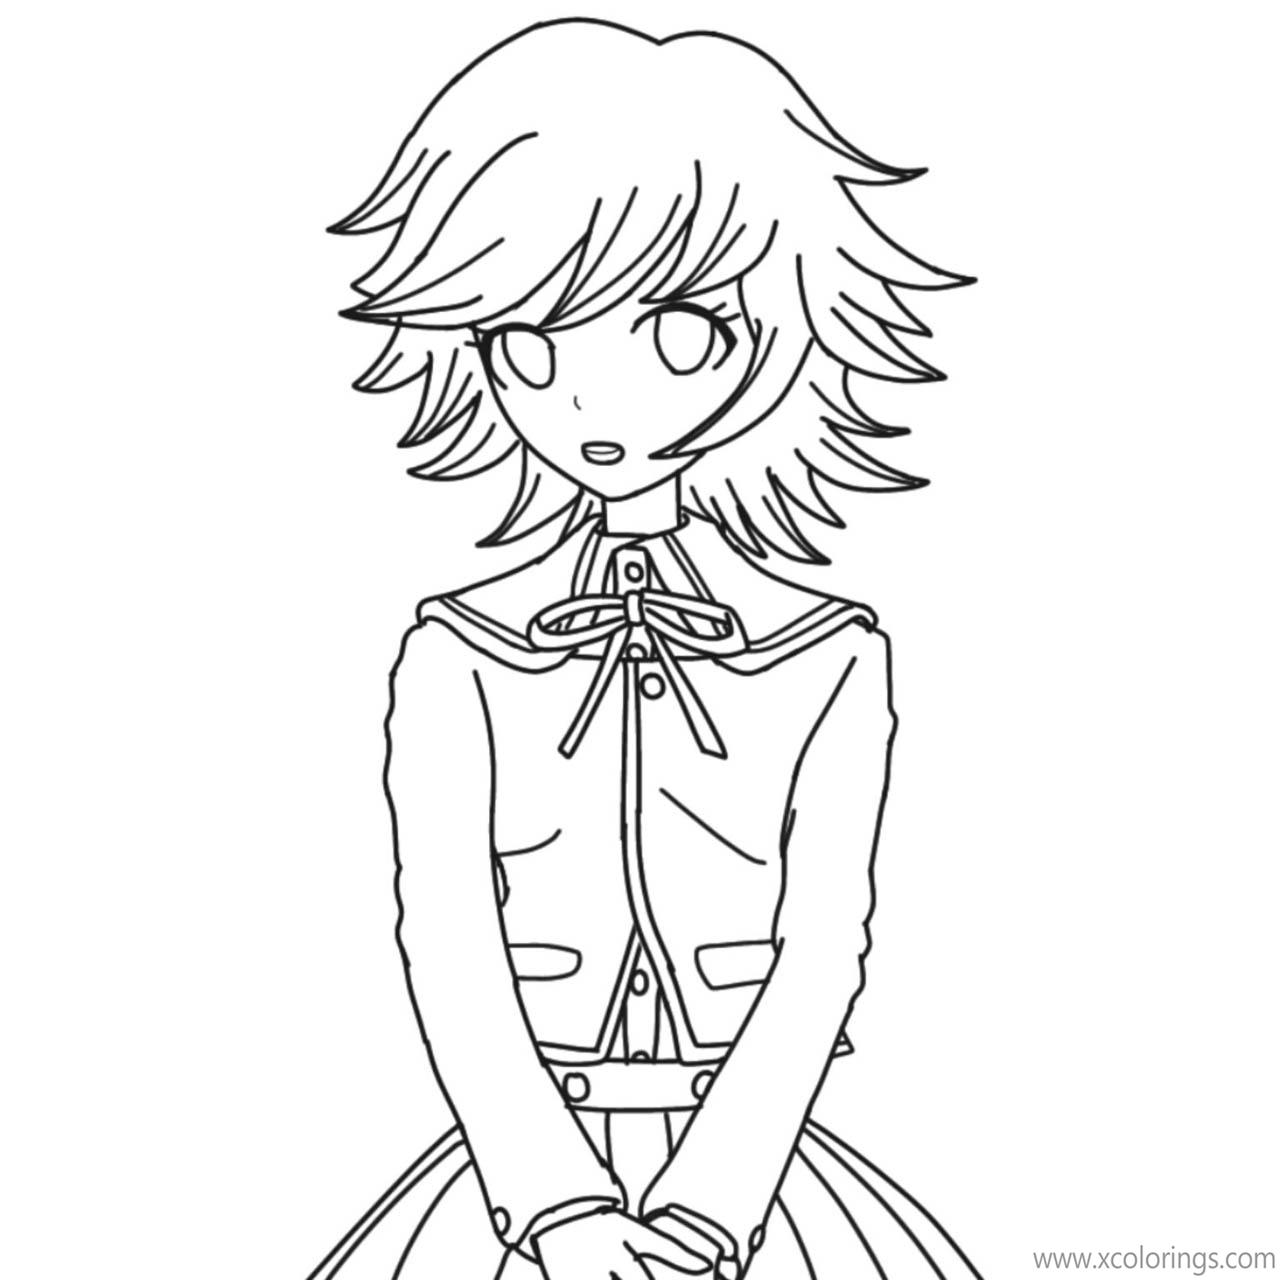 Free Chihiro from Danganronpa Coloring Pages printable